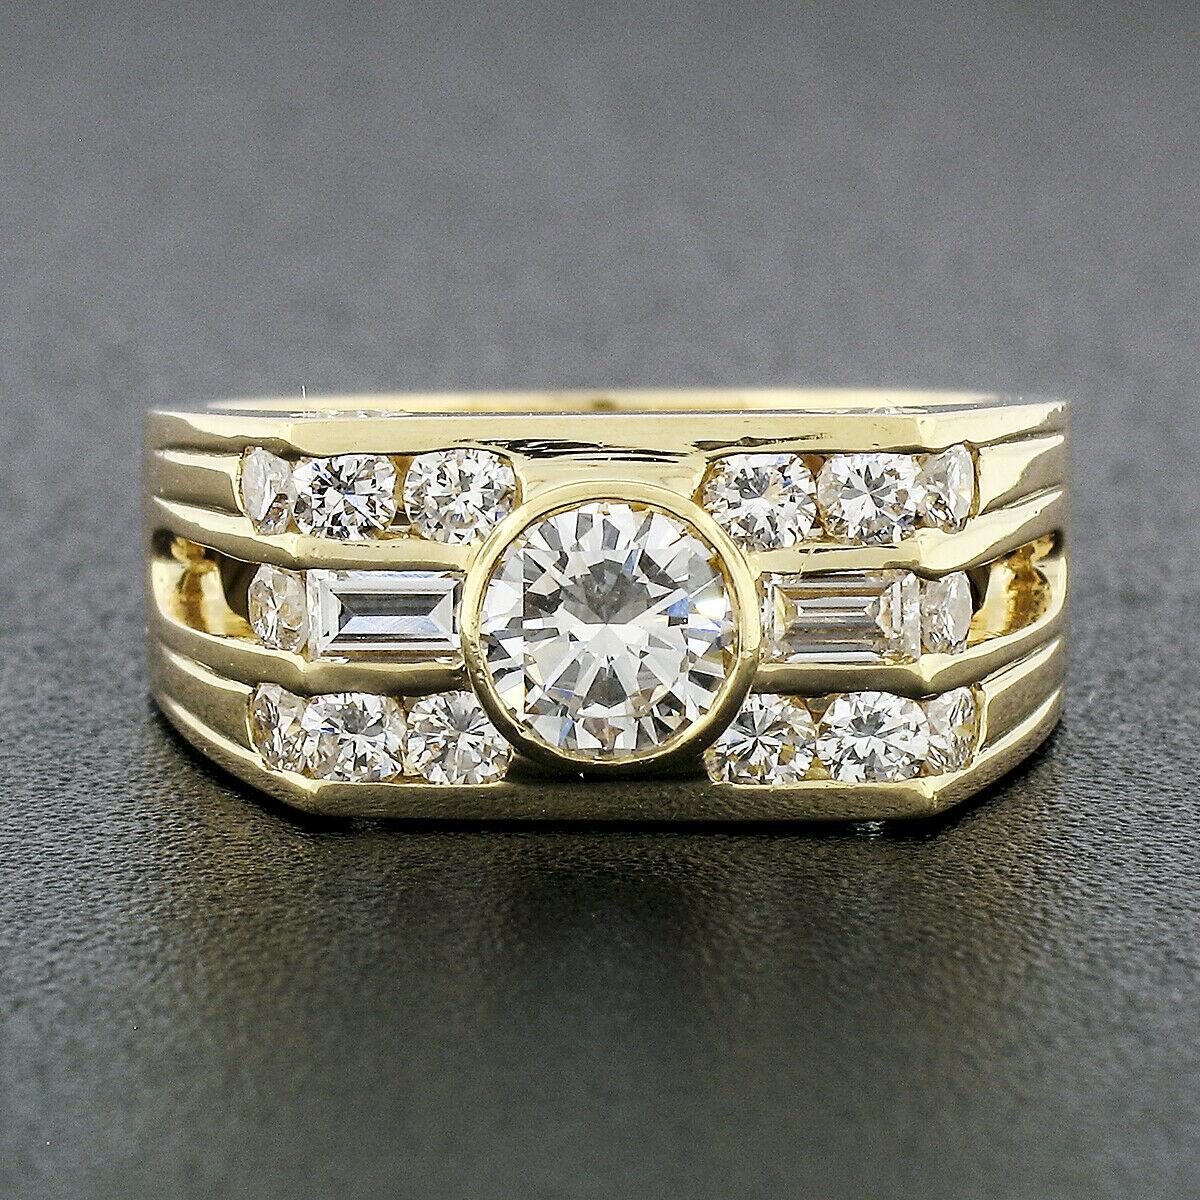 Here we have an absolutely outstanding men's band ring that was crafted from solid 18k yellow gold. It features a round brilliant cut diamond solitaire bezel set at its center with an approximate weight of 0.66 carats. That center stone is accented